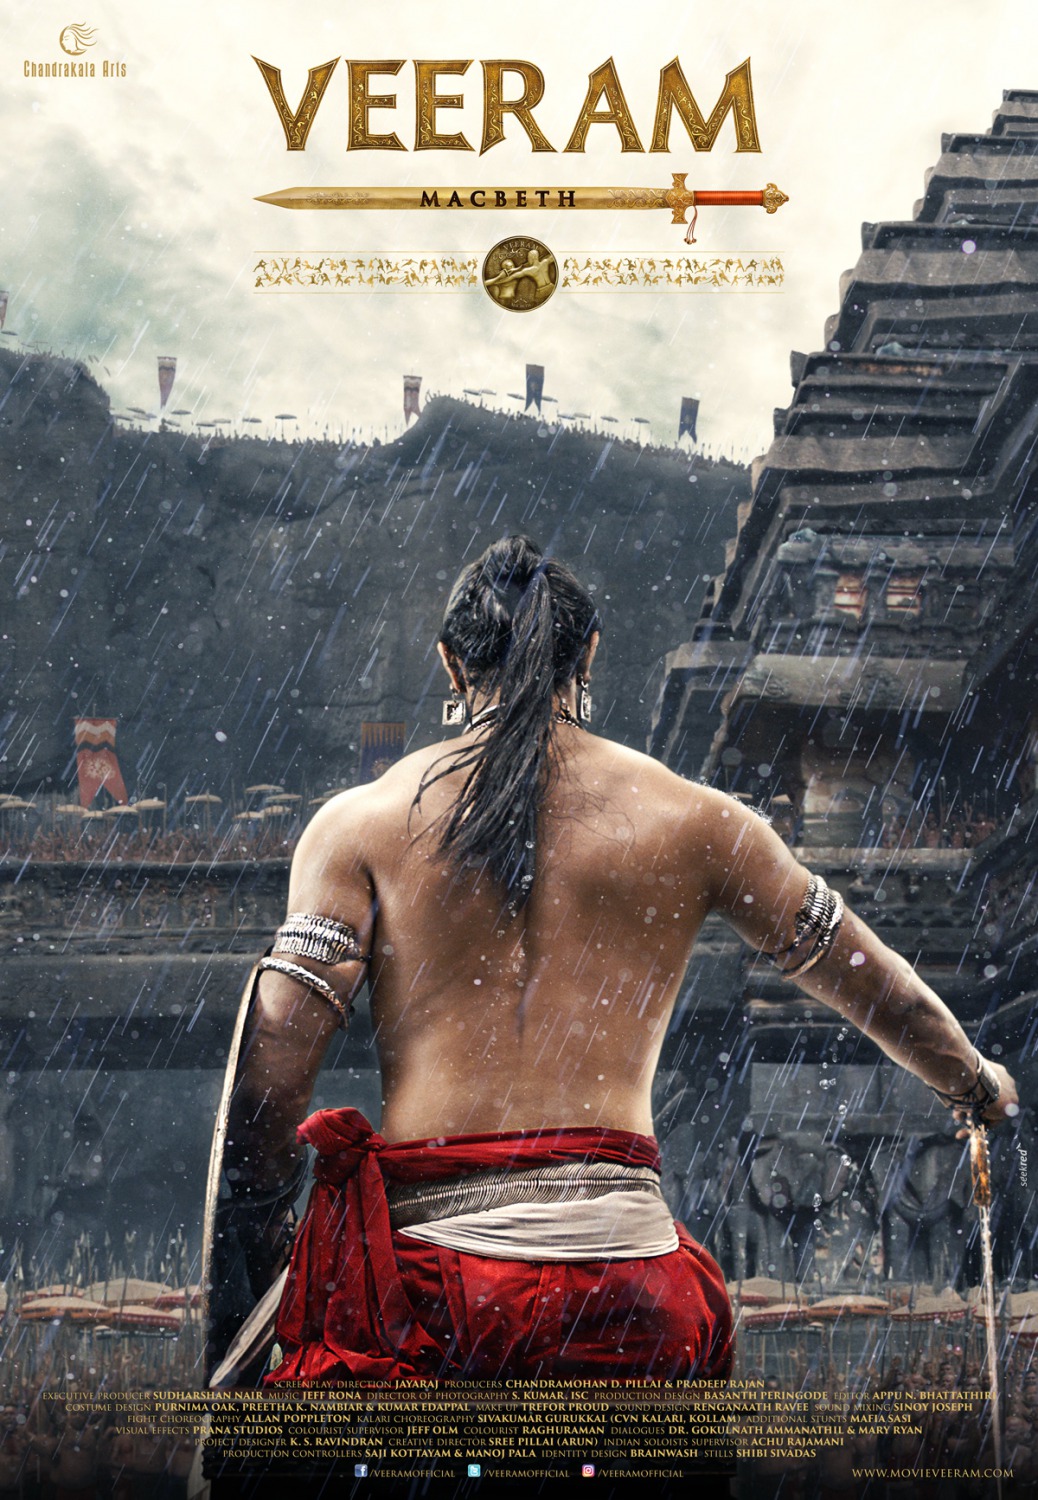 Extra Large Movie Poster Image for Veeram: Macbeth (#1 of 2)